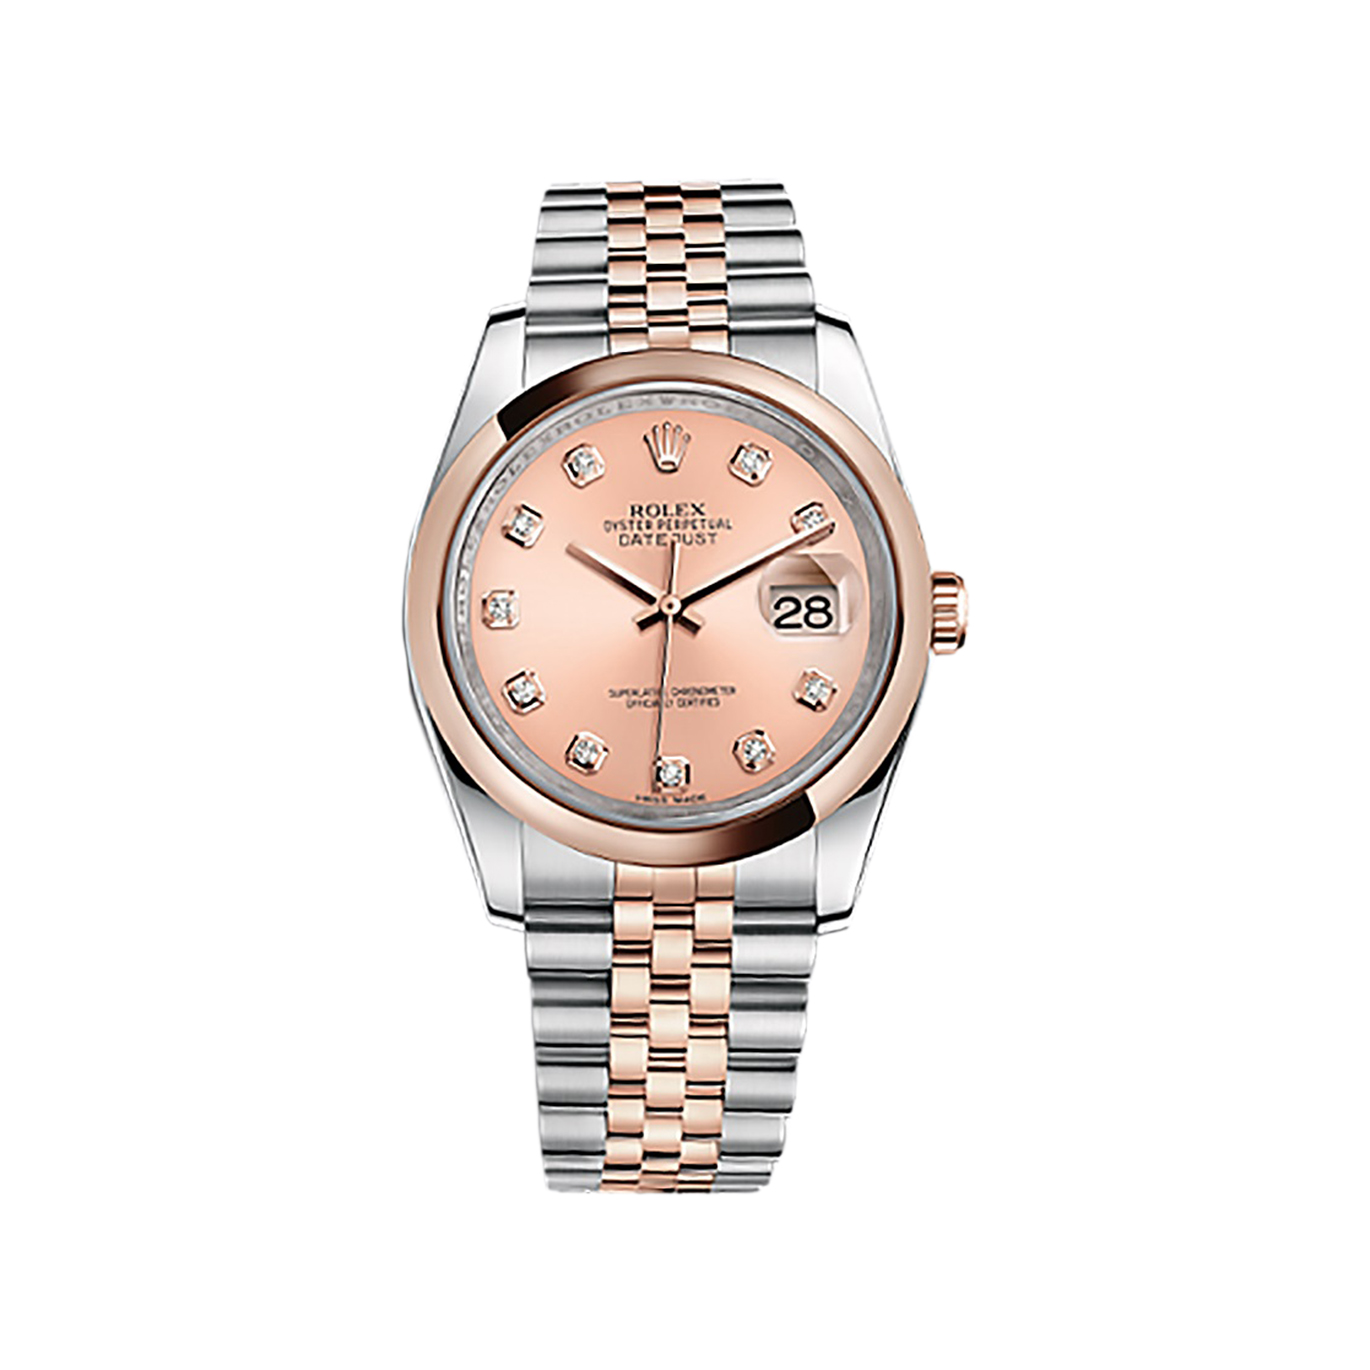 Datejust 36 116201 Rose Gold & Stainless Steel Watch (Pink Set with Diamonds)